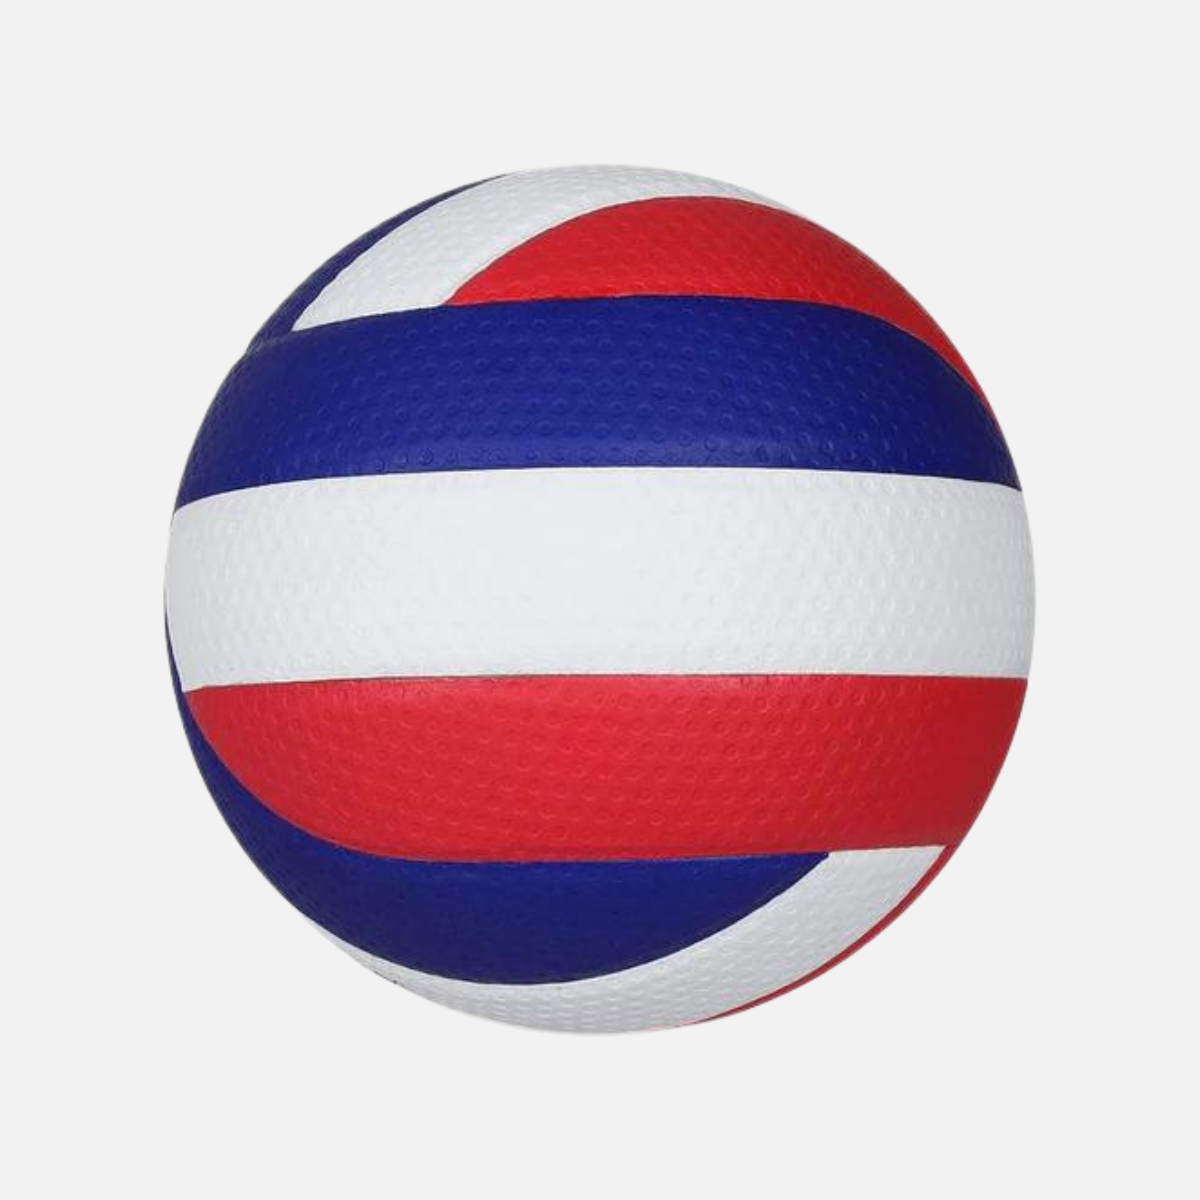 Nivia Vayu Pasted Volley Ball-Red/White/Blue